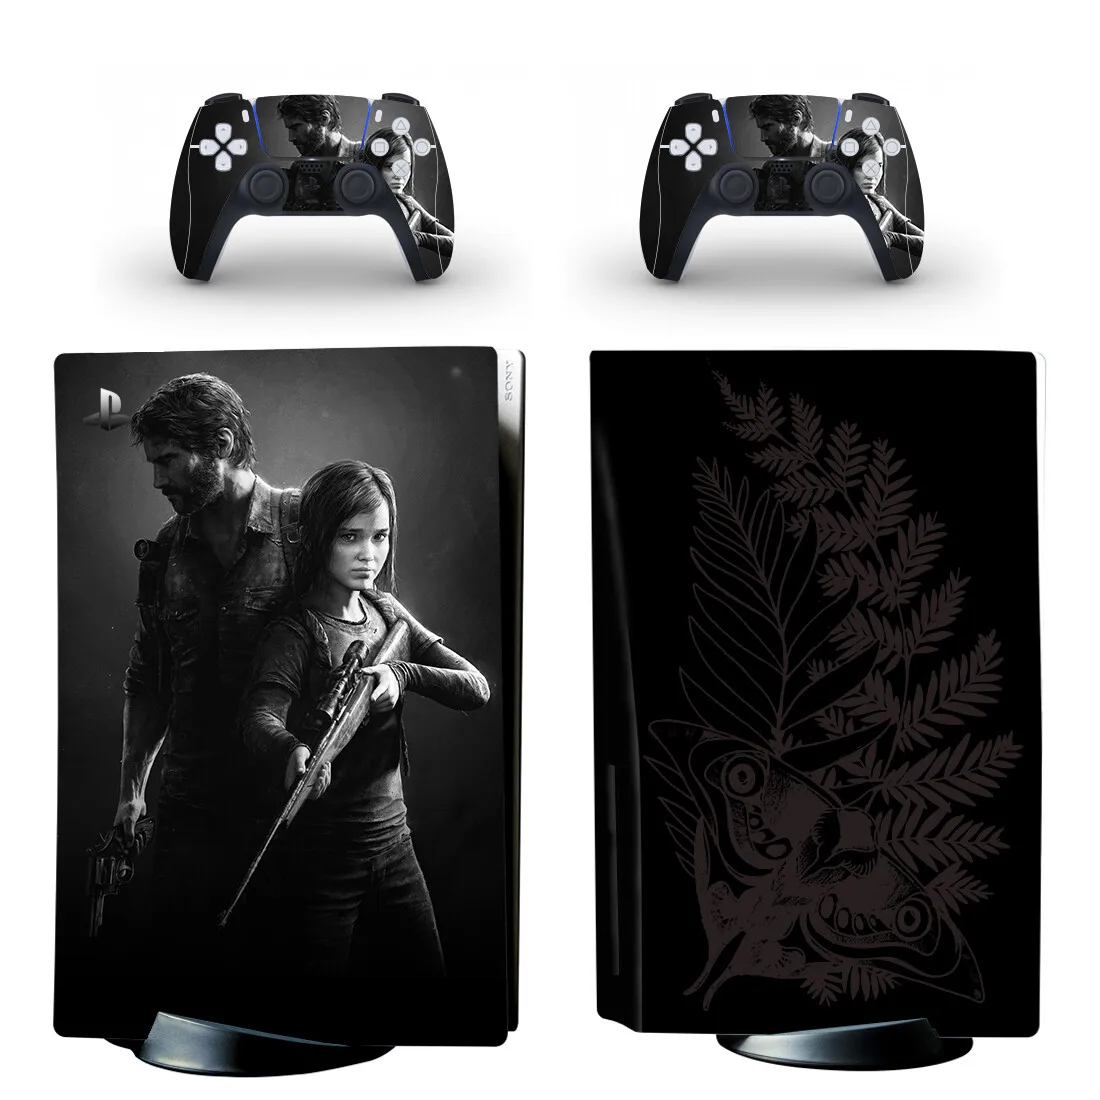 The Last of Us Ellie Joel PS5 Disc Skin Sticker Protector Decal Cover for Console Controller PS5 Disk Skin Sticker Vinyl images - 6